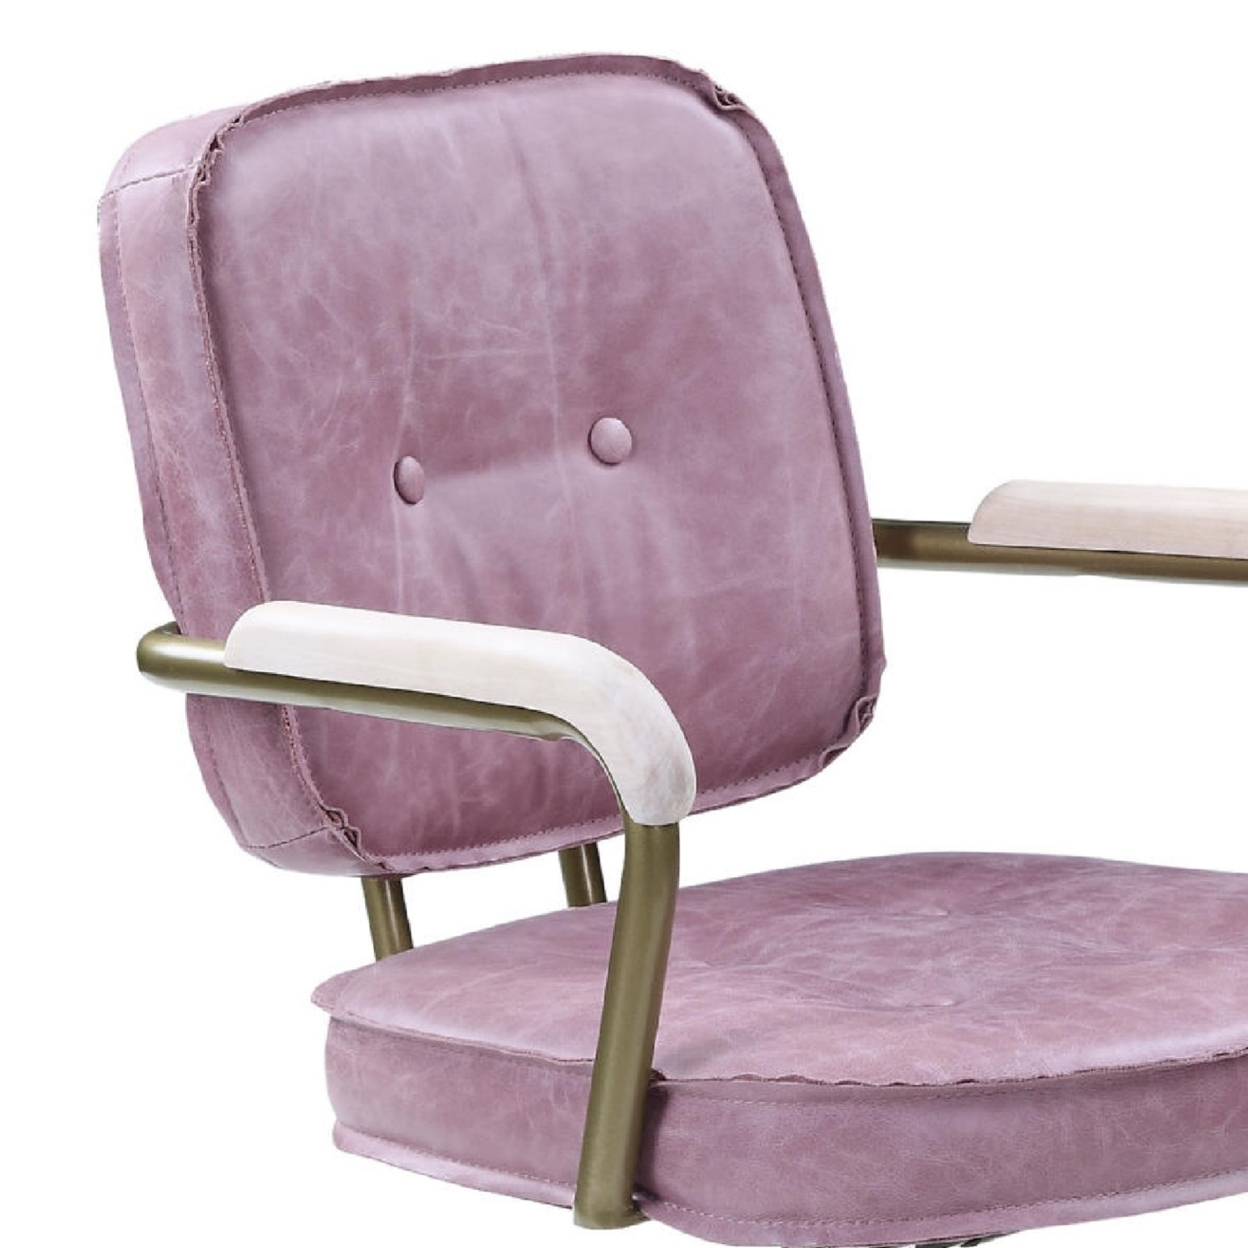 Office Chair With Leather Seat And Button Tufted Back, Pink- Saltoro Sherpi